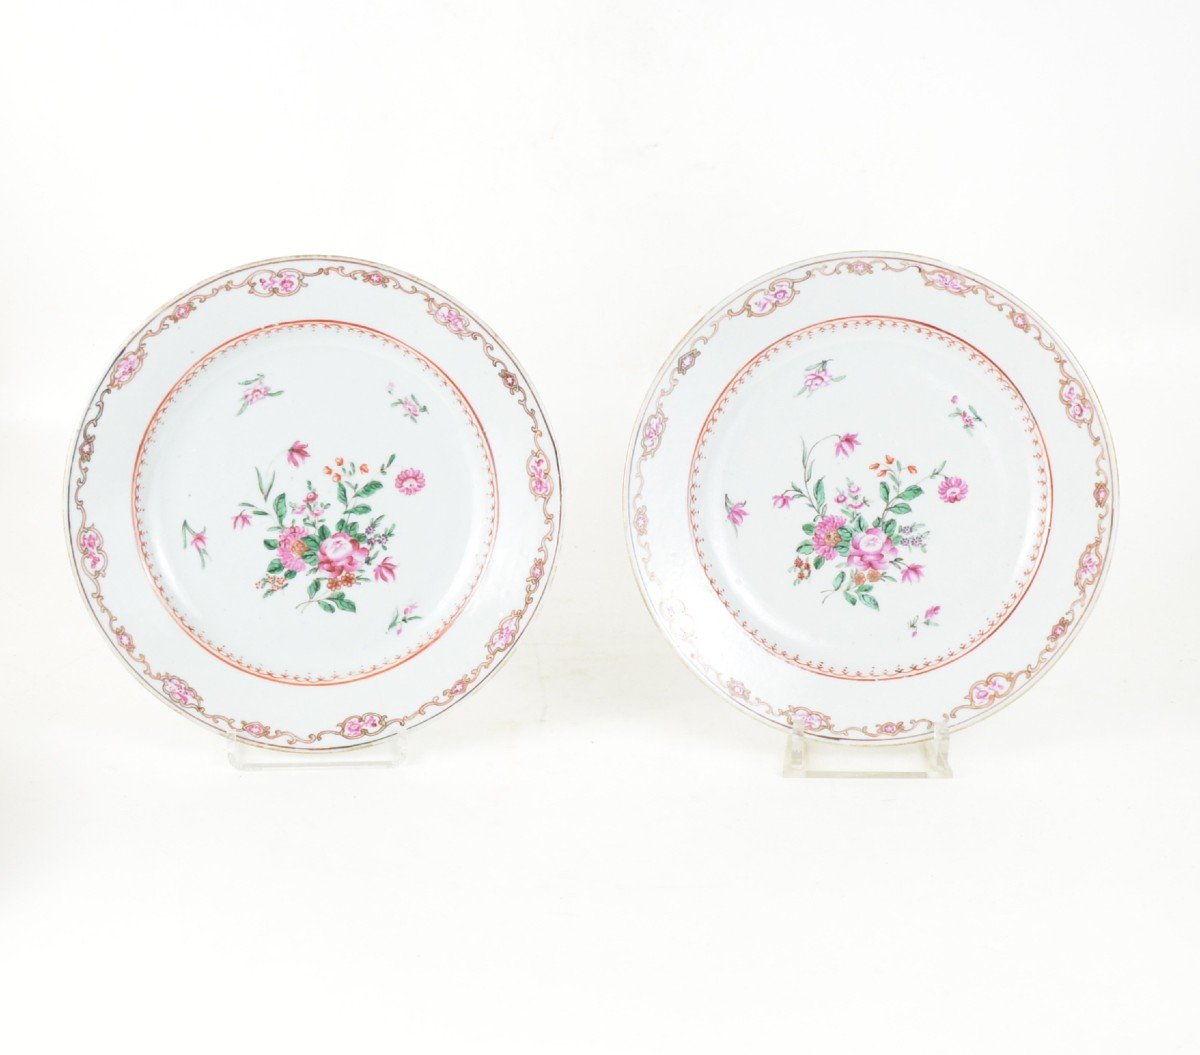 2 Chinese Porcelain Plates,  Famille Rose, Qianlong Period 1736-1795